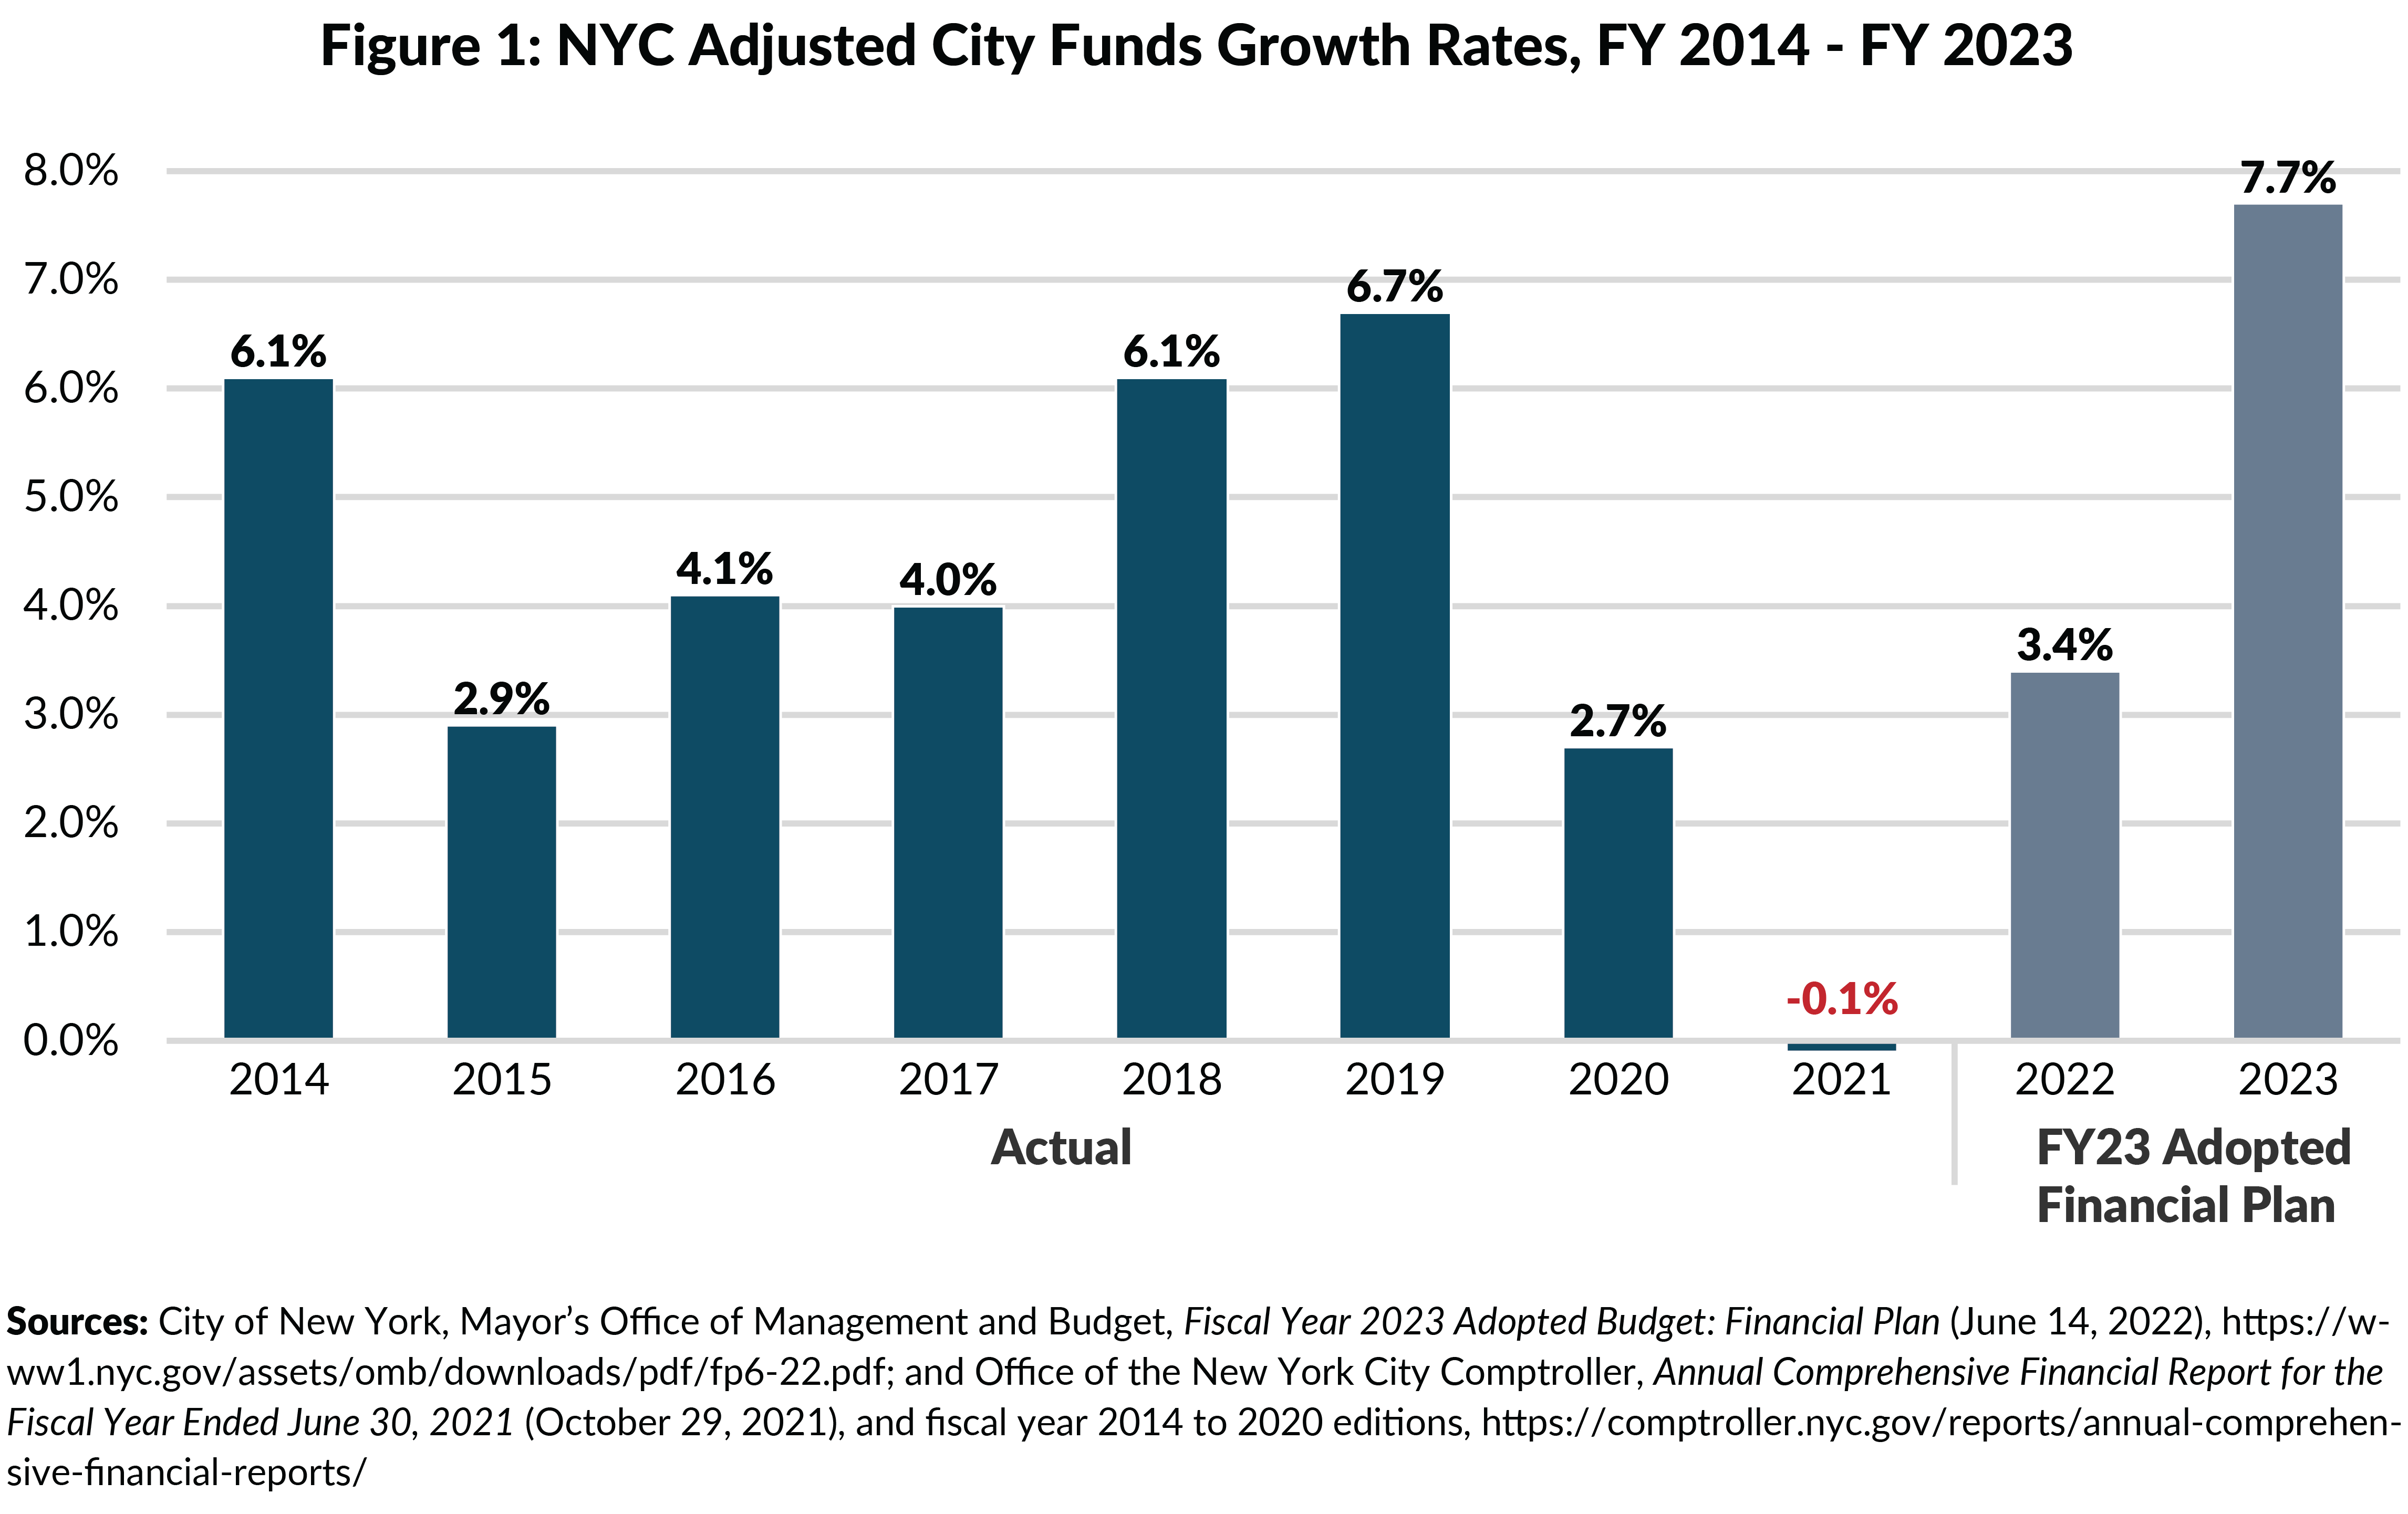 Figure 1: NYC Adjusted City Funds Budget Growth Rates, FY 2014 to FY 2023